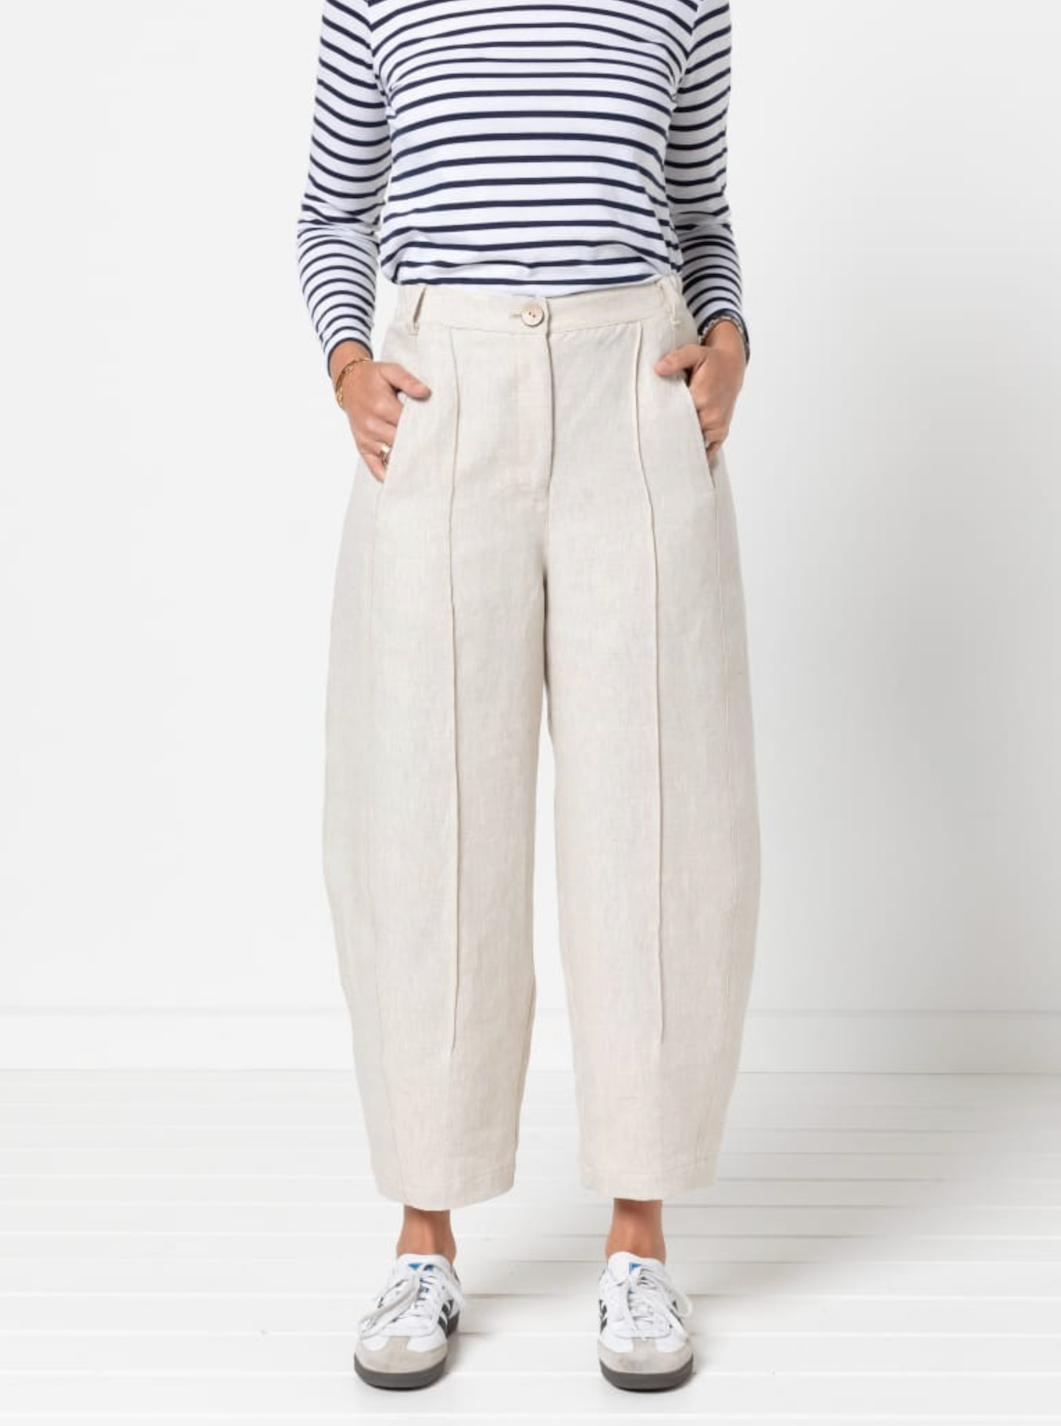 Style Arc Twig Woven Pant